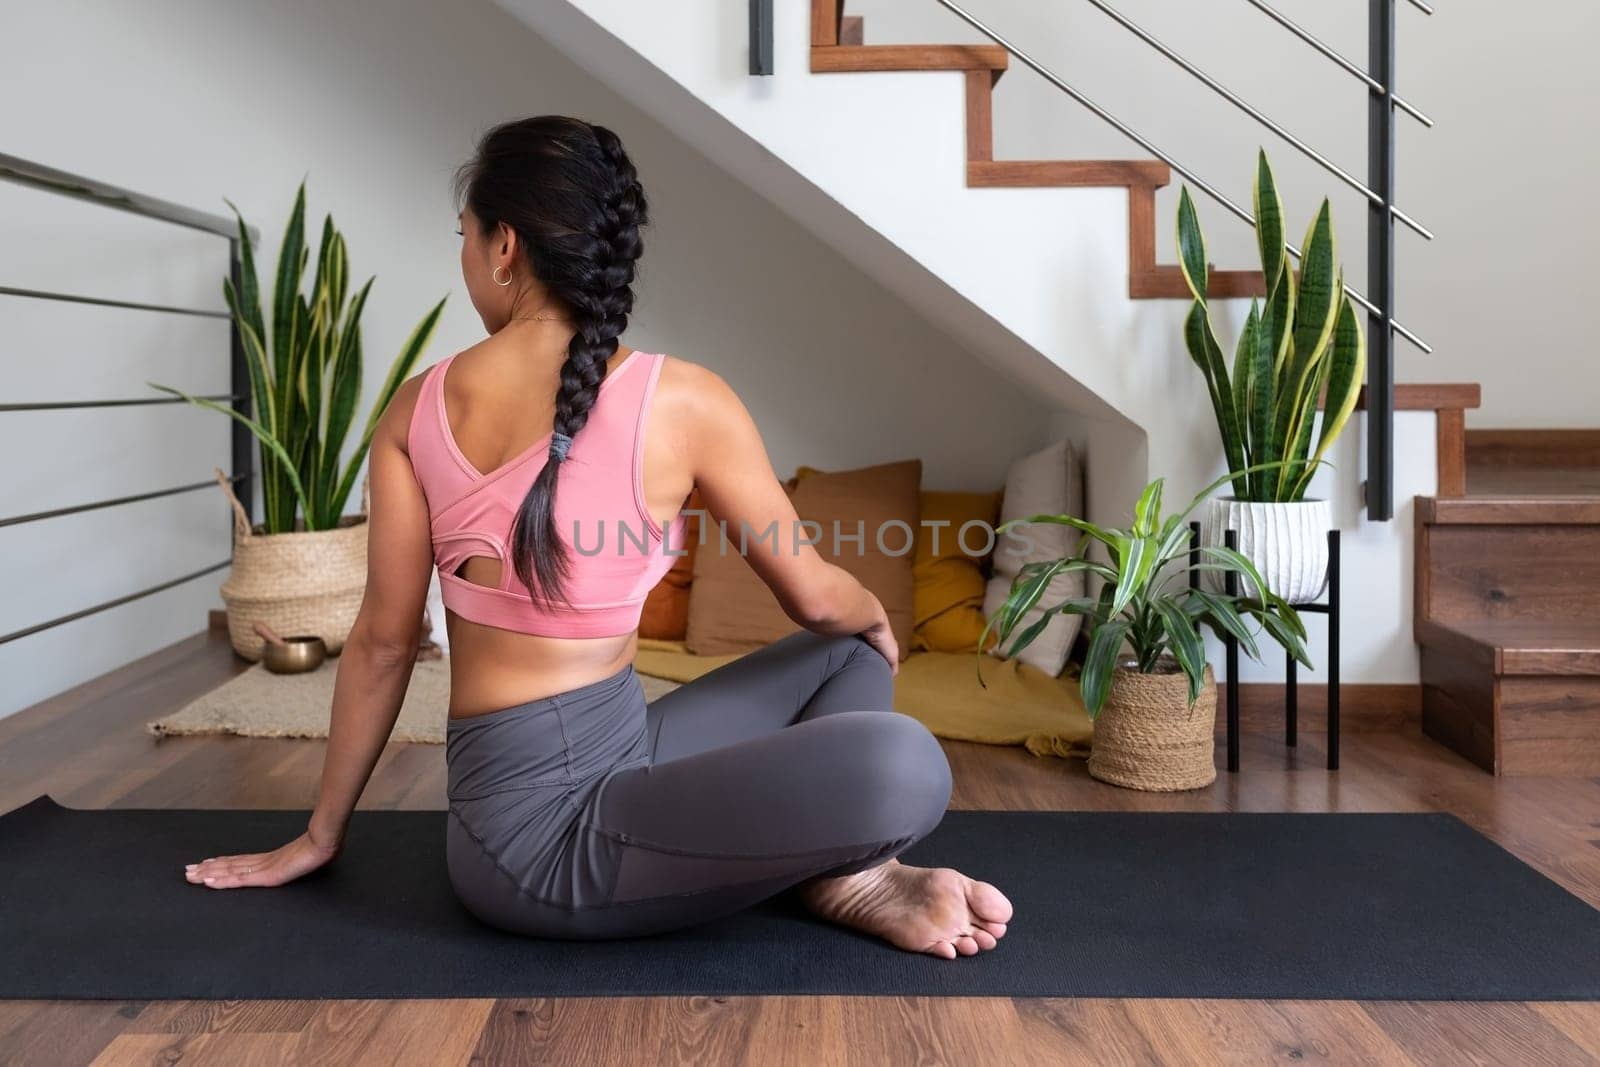 Young woman doing seated twist yoga pose at home. Active and healthy lifestyle.